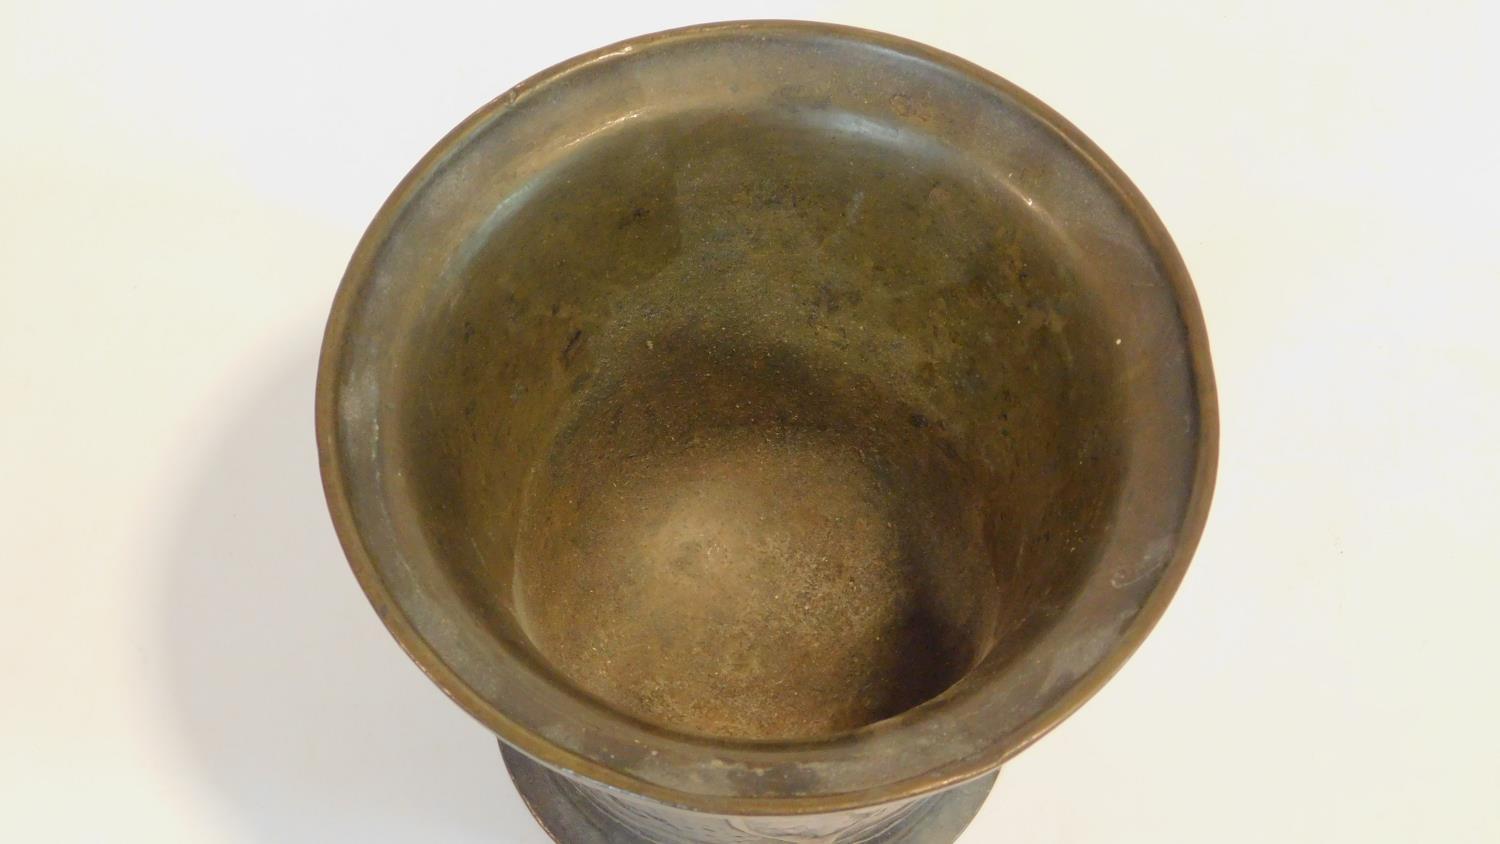 An antique bronze handled mortar and brass pestle. The handle has a textured design and the front of - Image 3 of 8